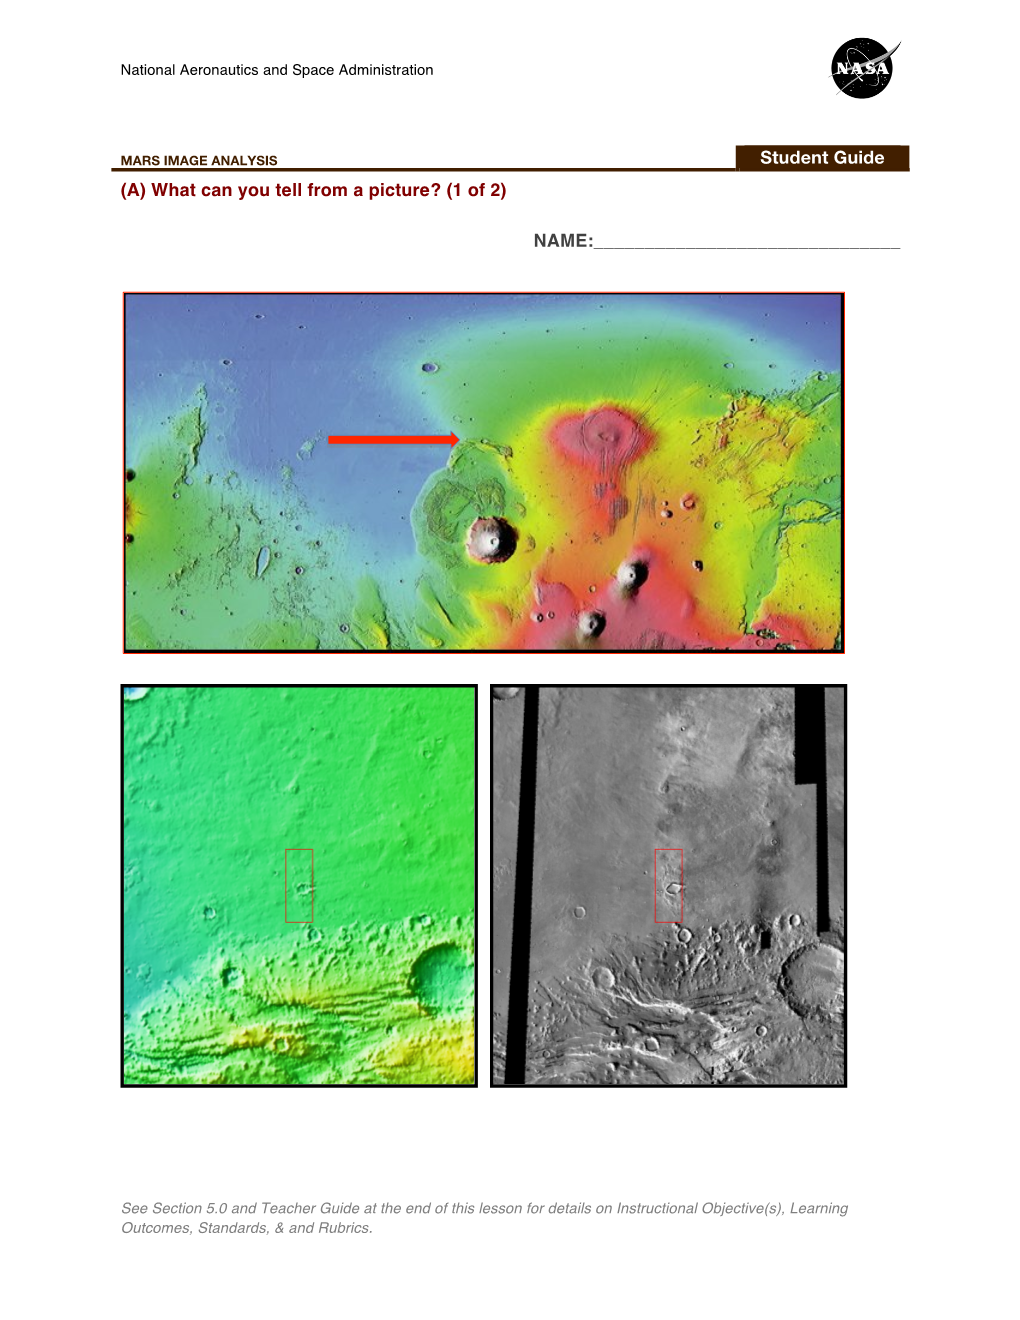 MARS IMAGE ANALYSIS Student Guide (A) What Can You Tell from a Picture? (1 of 2)